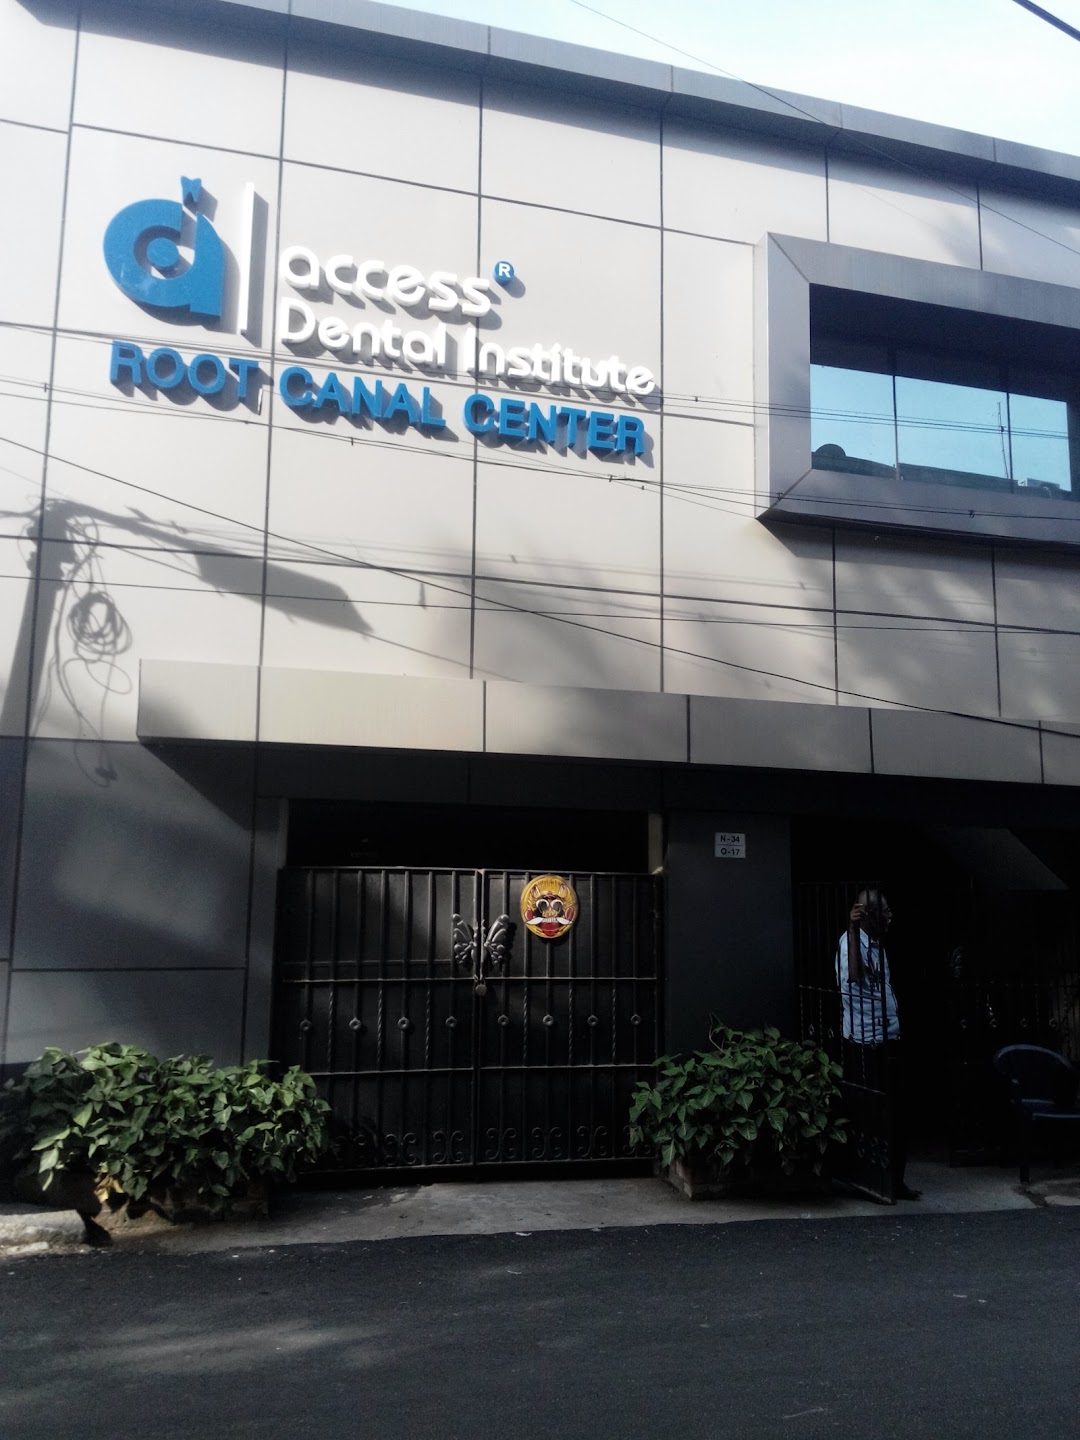 Access Dental Institute And Root Canal Center